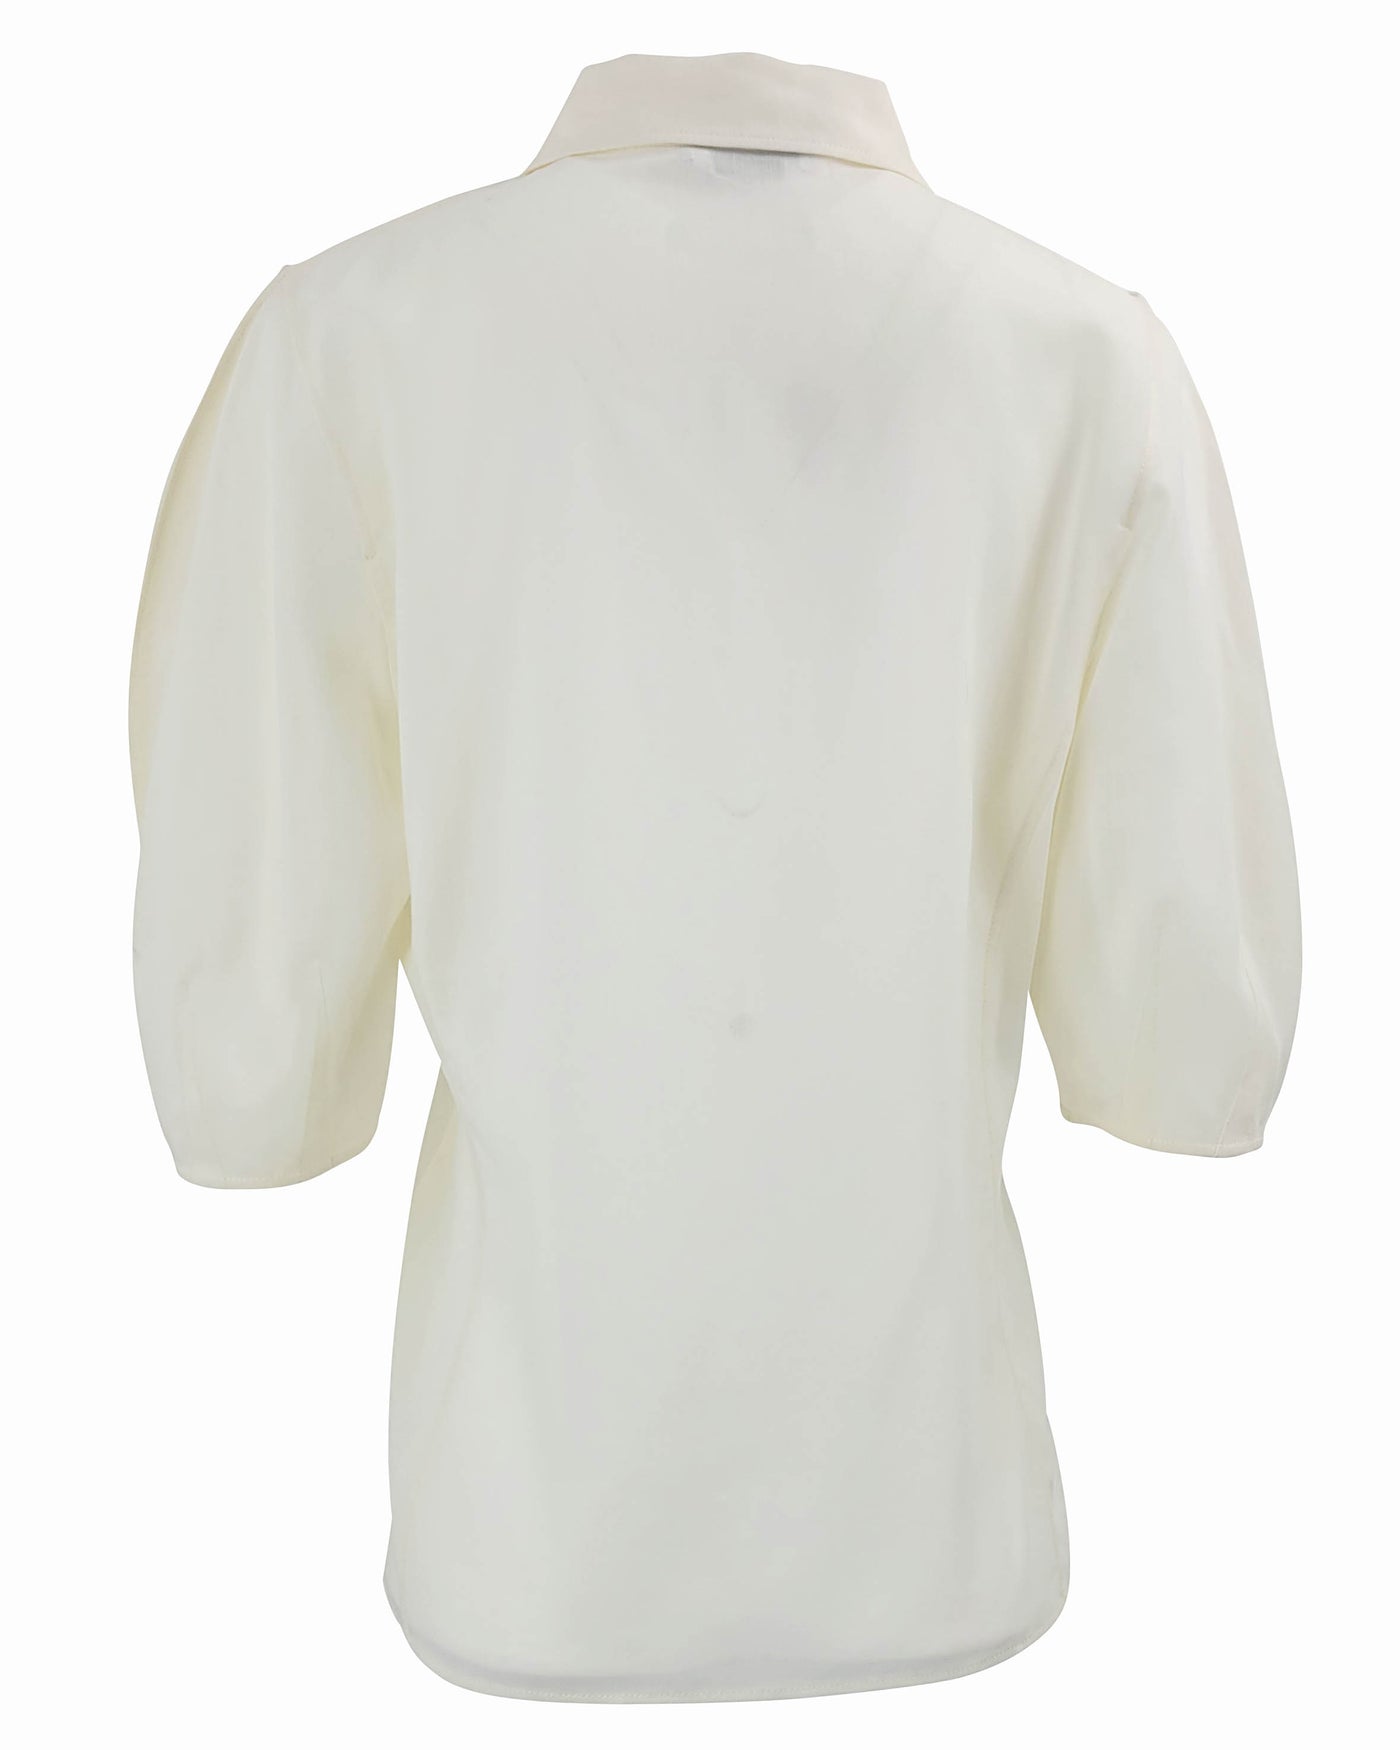 Gabriela Hearst Sansi Wool Top in Butter - Discounts on Gabriela Hearst at UAL